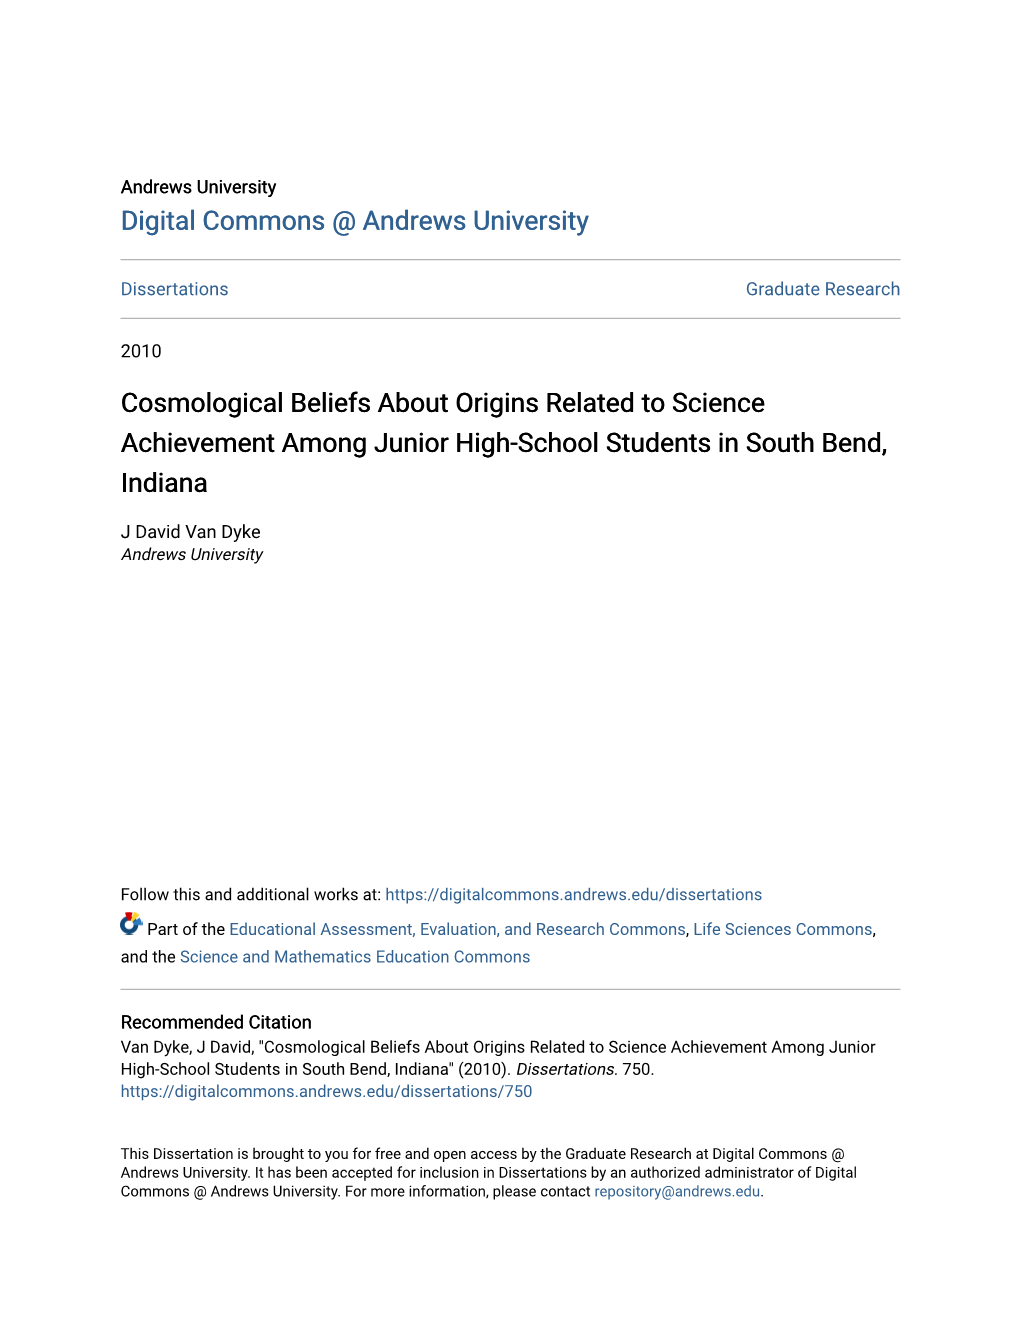 Cosmological Beliefs About Origins Related to Science Achievement Among Junior High-School Students in South Bend, Indiana